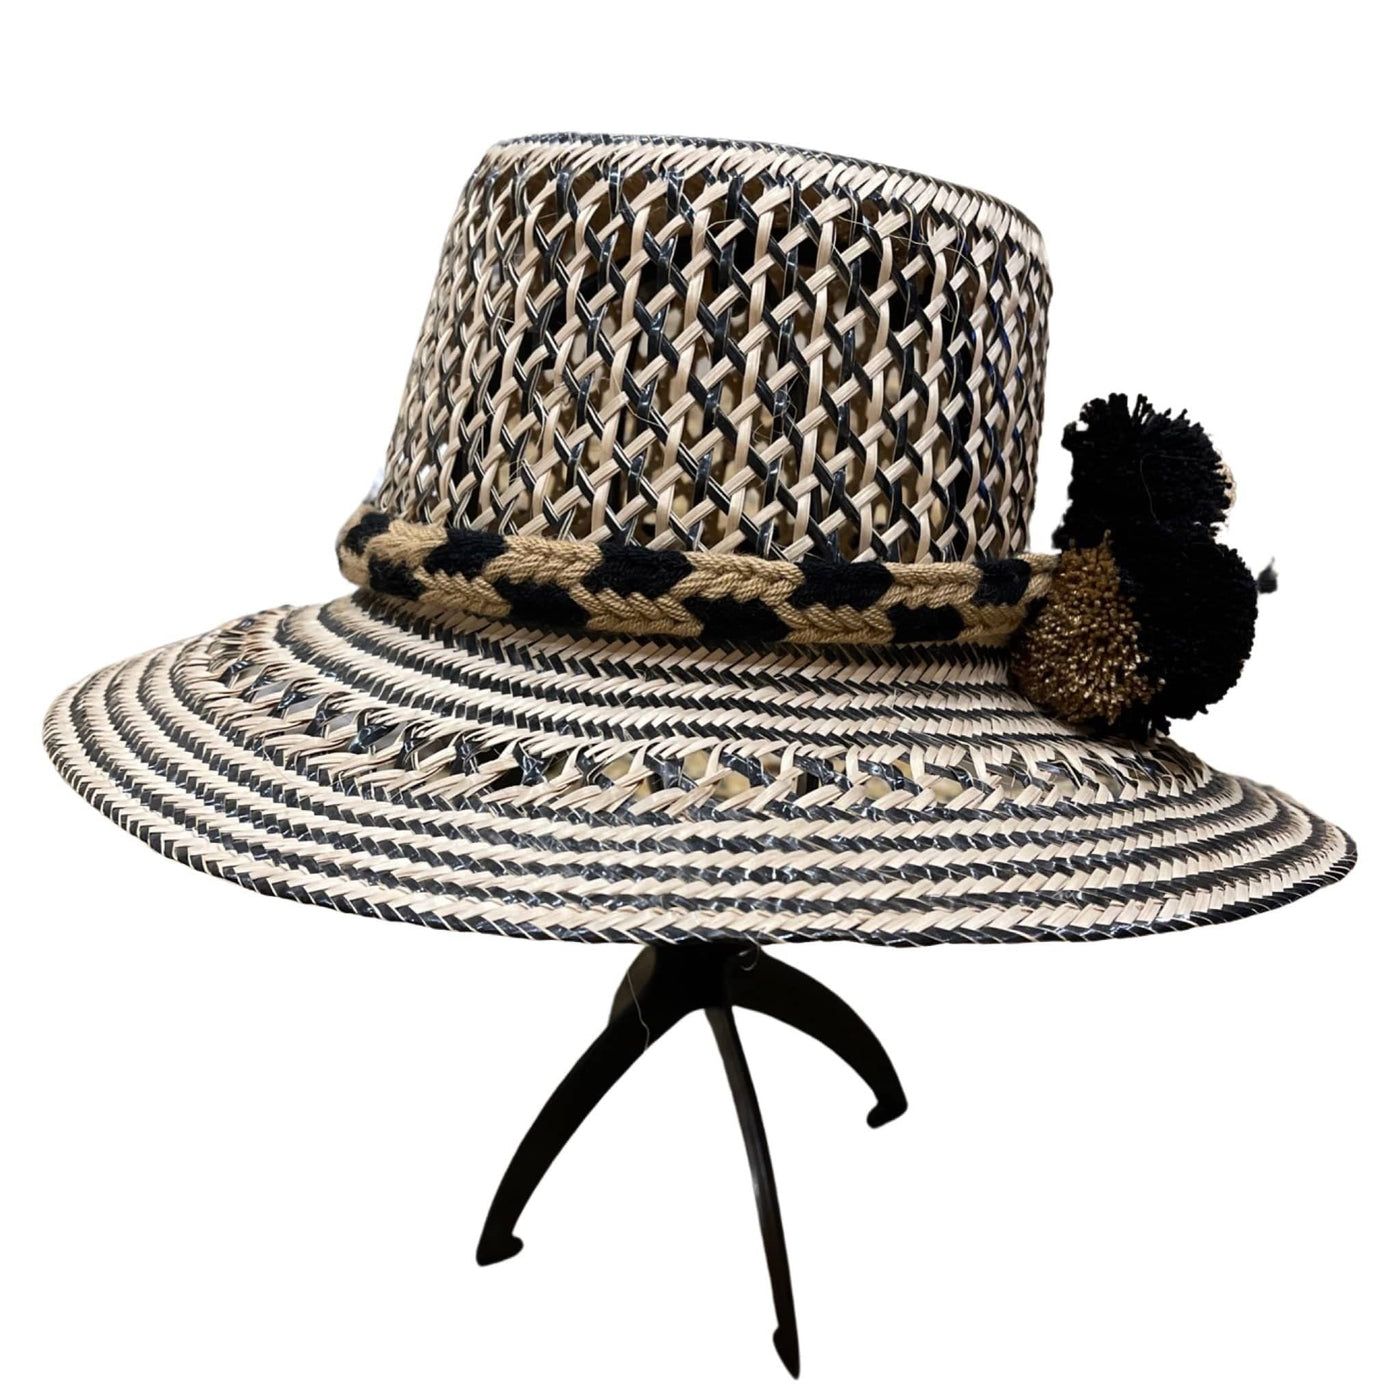 BeeLoved Custom Artisan Bags and Gifts Hats Large Brim Special Order Black Honeycomb Brim Hat